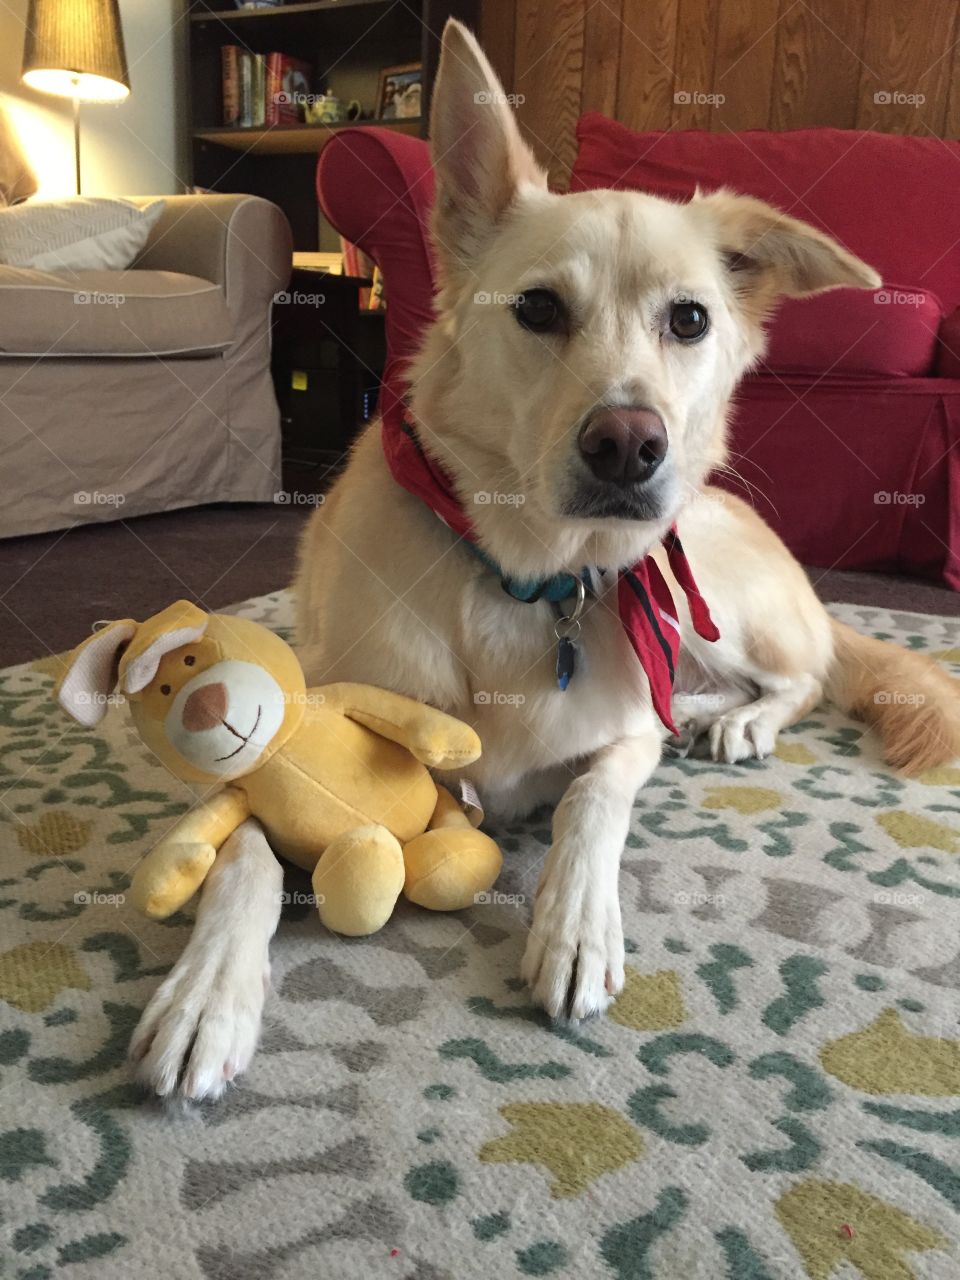 Simba and his toy bunny